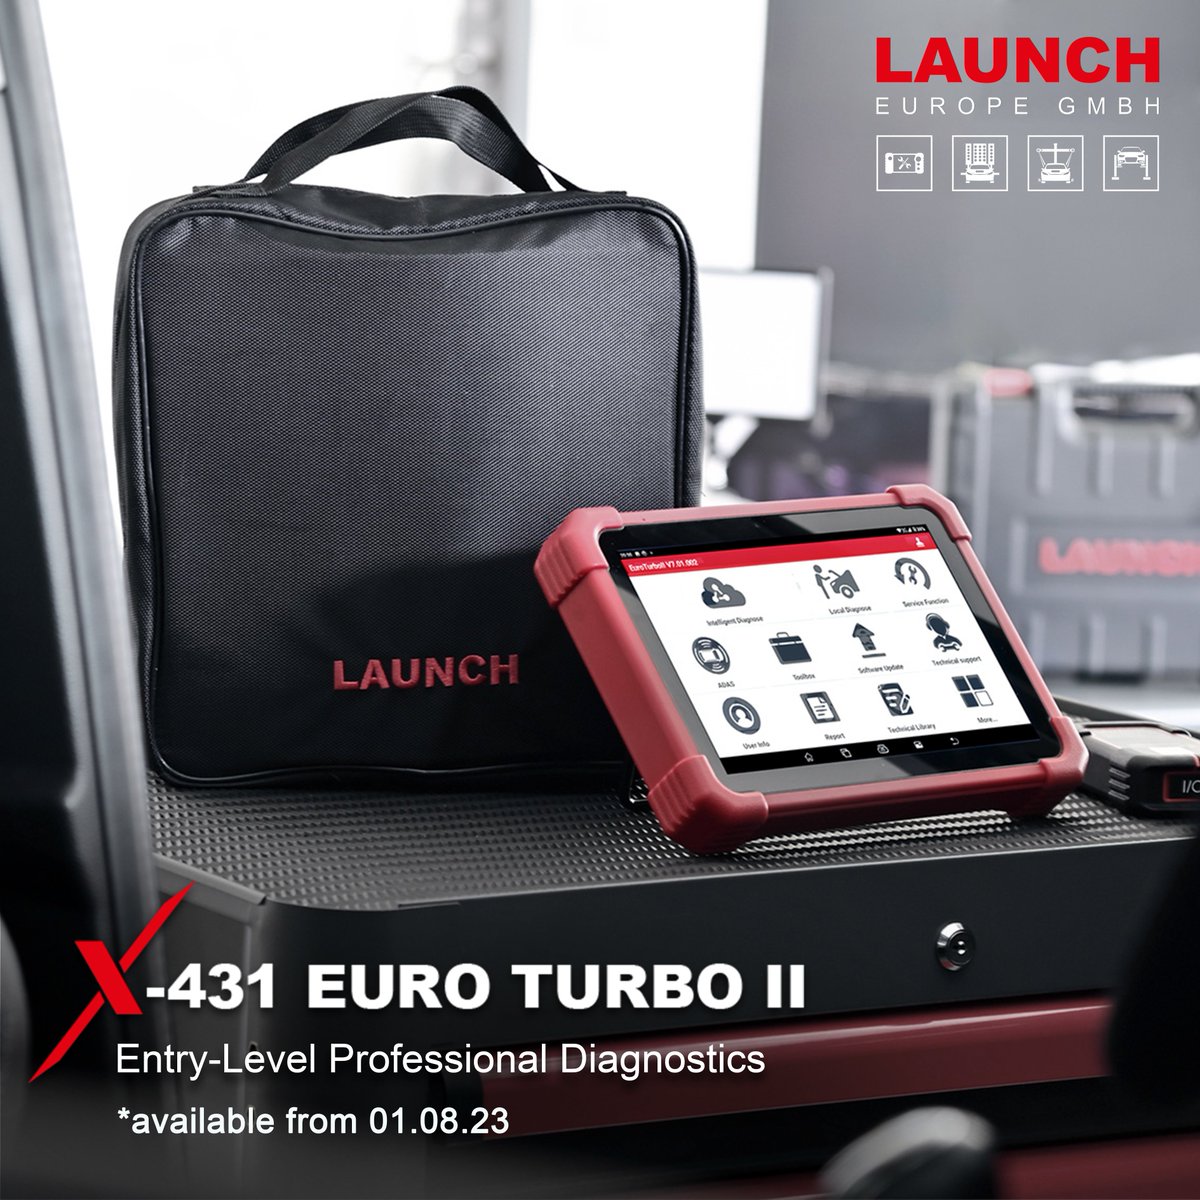 👨‍🔧 THE NEW LAUNCH X-431 TURBO II👨‍🔧
🆕hardware 🆕software 🆕functions 🆕toolbox

👉check on our homepage
launch-europe.eu/x-431-euro-tur…

#LAUNCHEurope #vehicle #car #vehiclediagnostic #cardiagnostic #cars #carmaintanance #vehiclemaintanance #workshop #garage #carworkshop